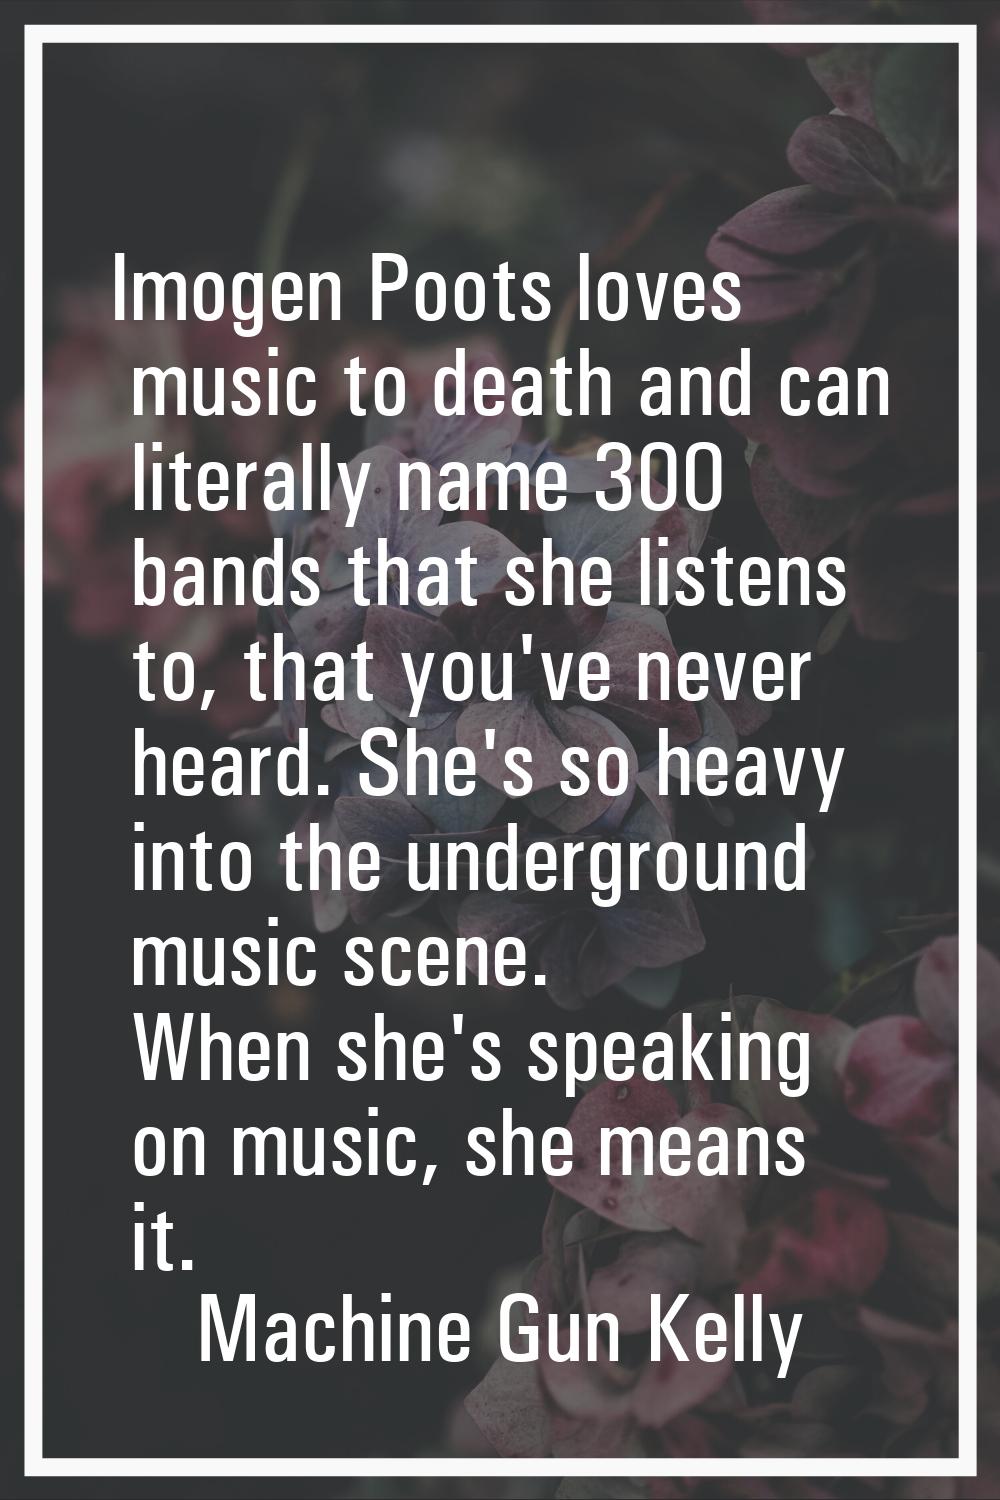 Imogen Poots loves music to death and can literally name 300 bands that she listens to, that you've